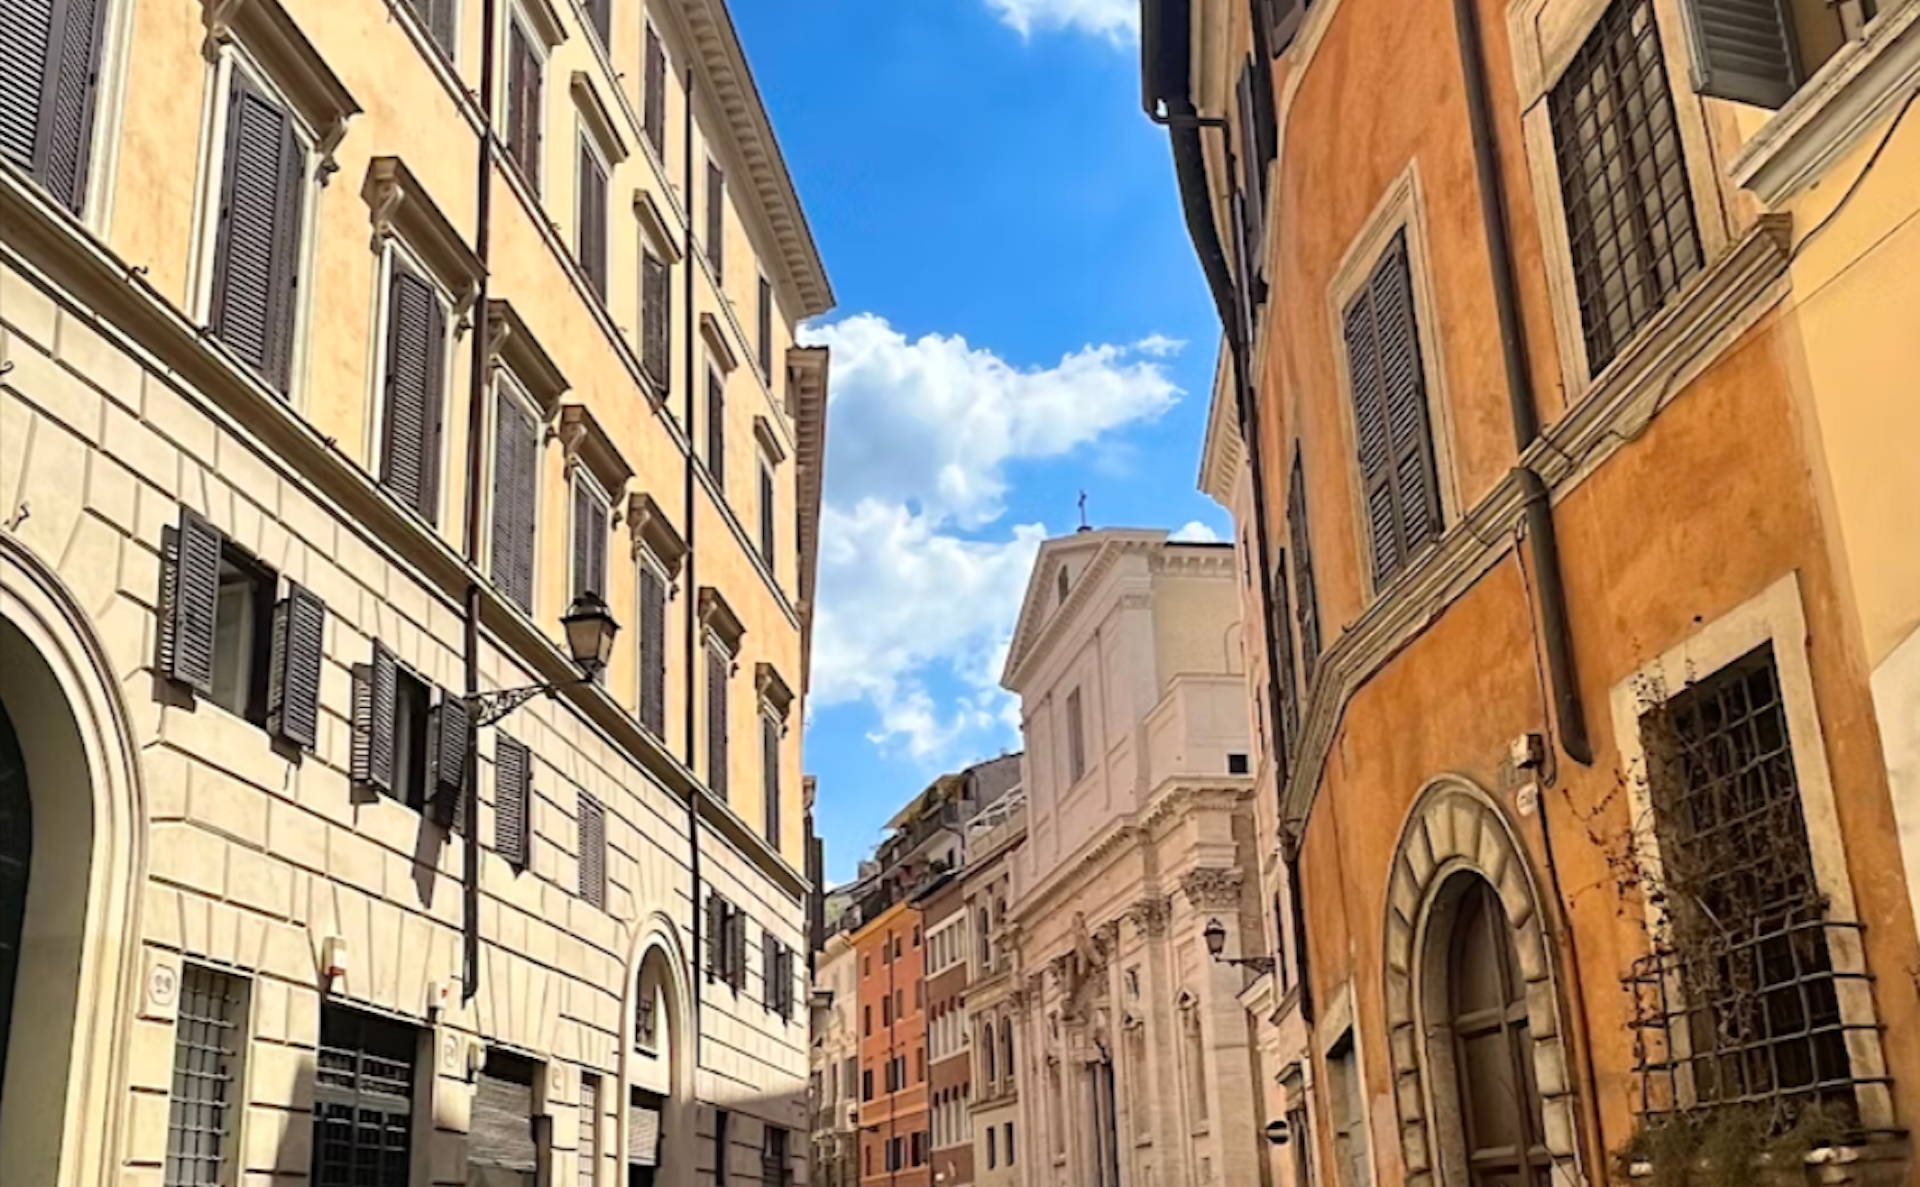 The ochre-colored buildings of Rome's Banchi Vecchi neighborhood